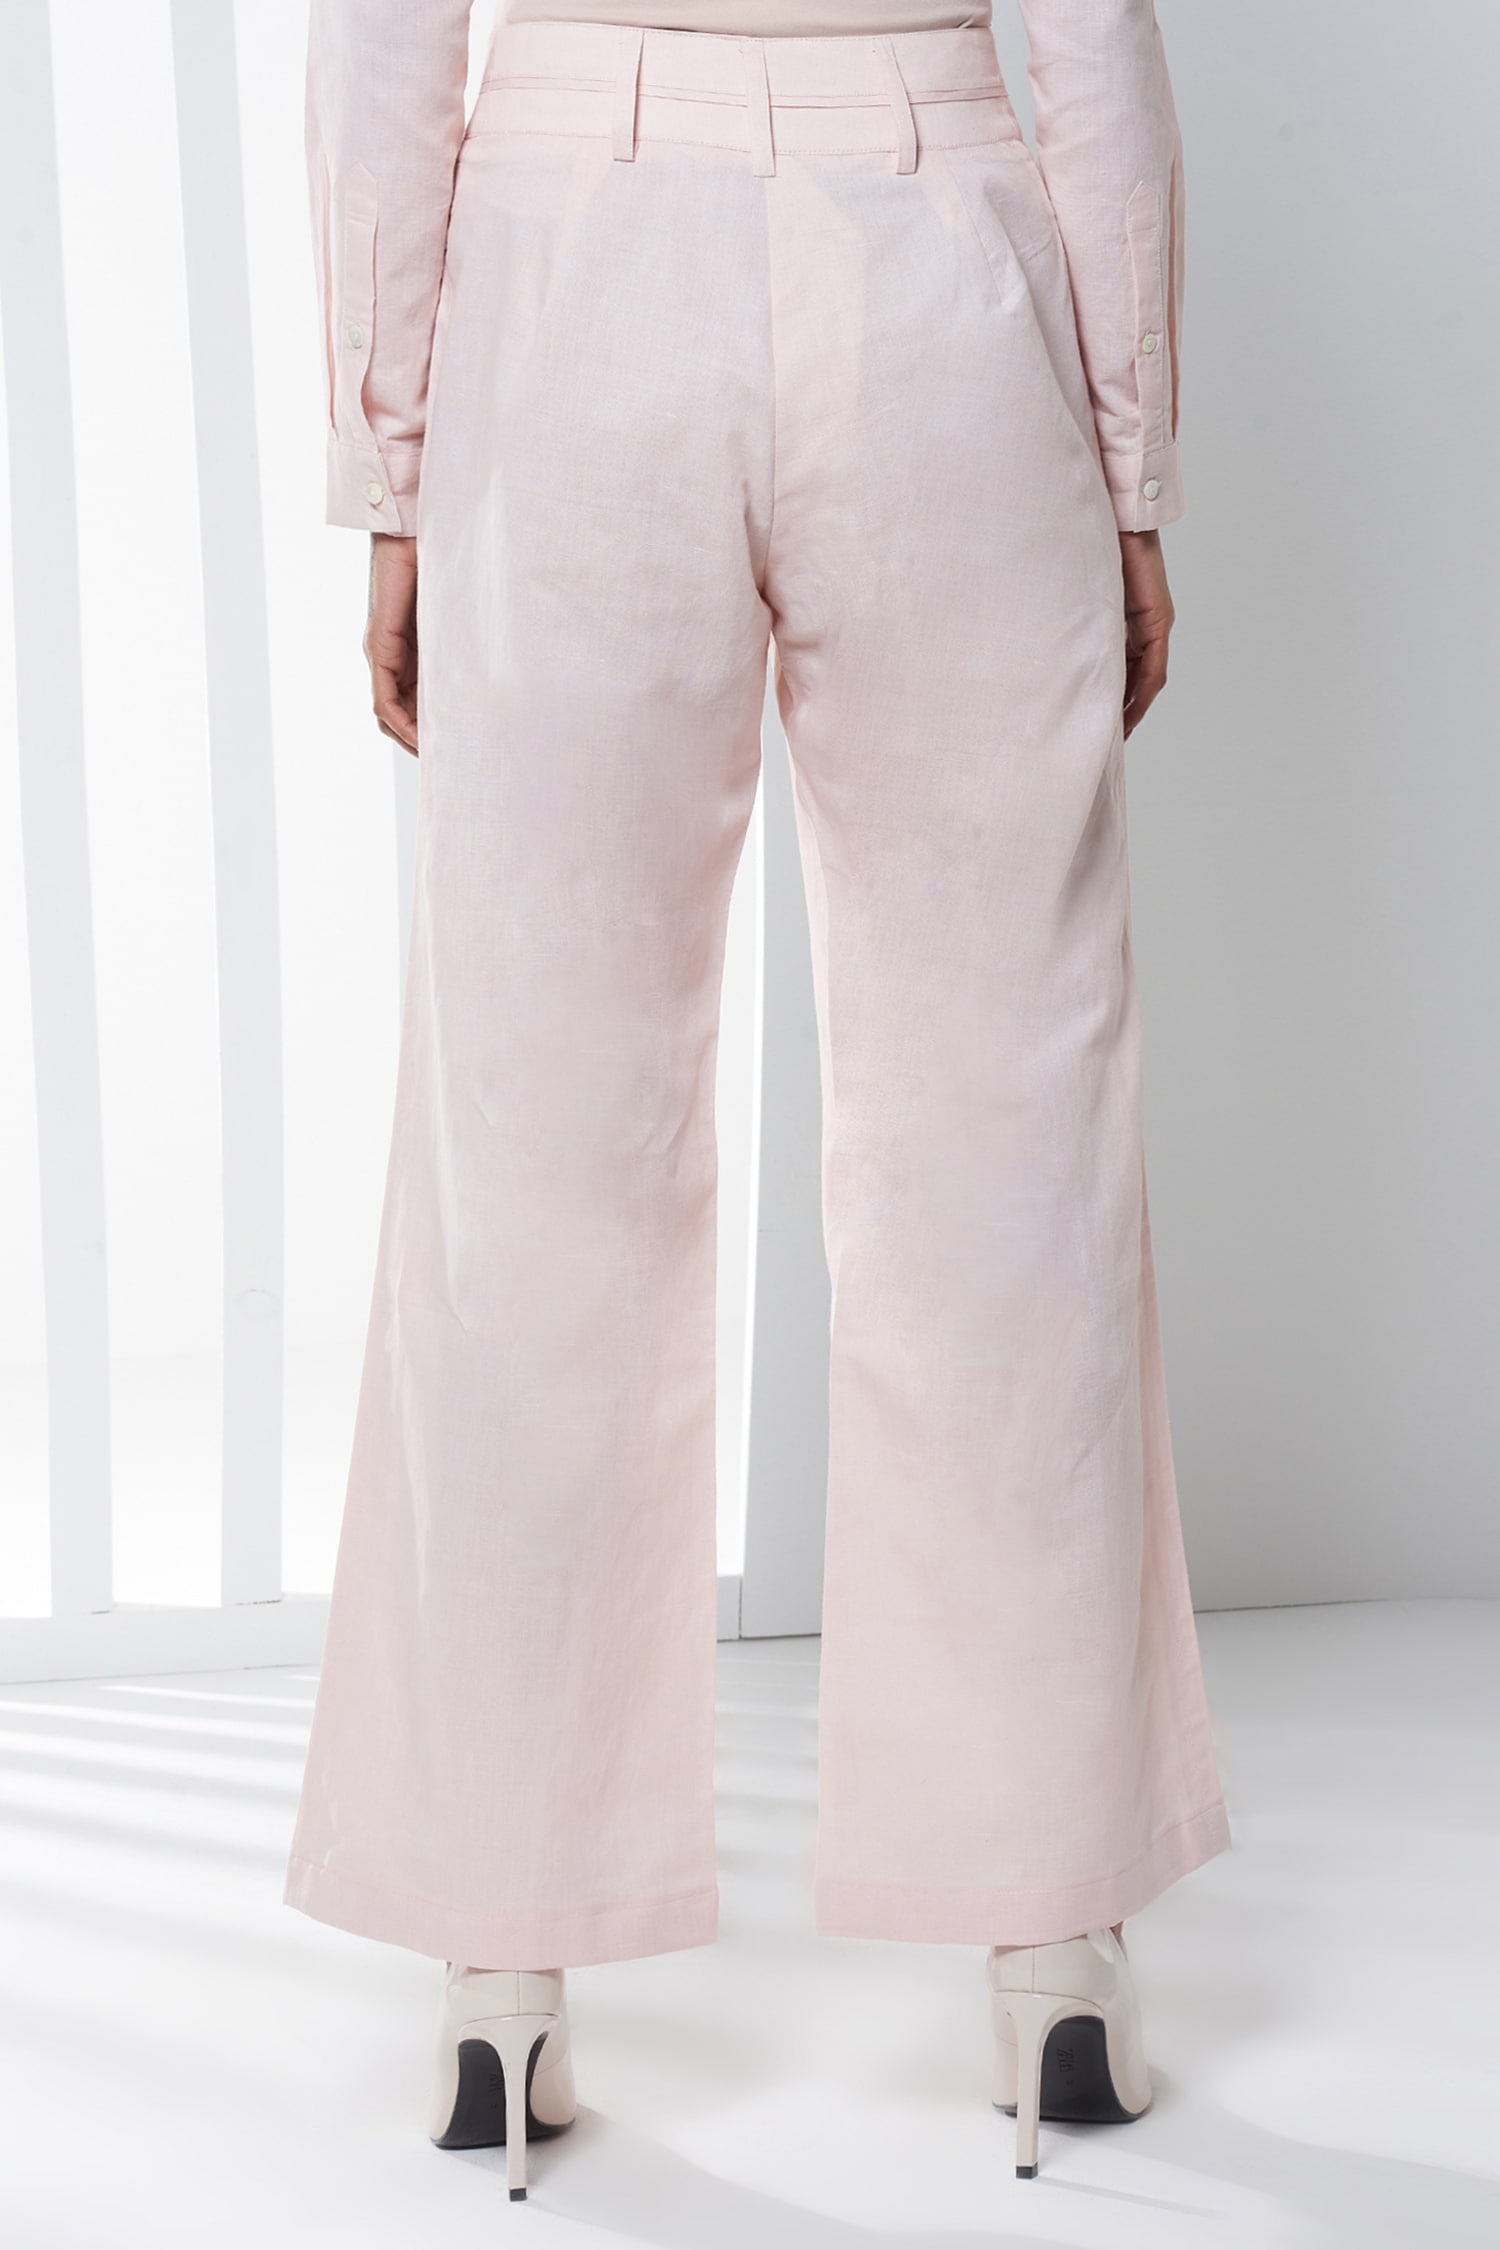 Pink Linen Trousers  Buy Pink Linen Trousers Online In India